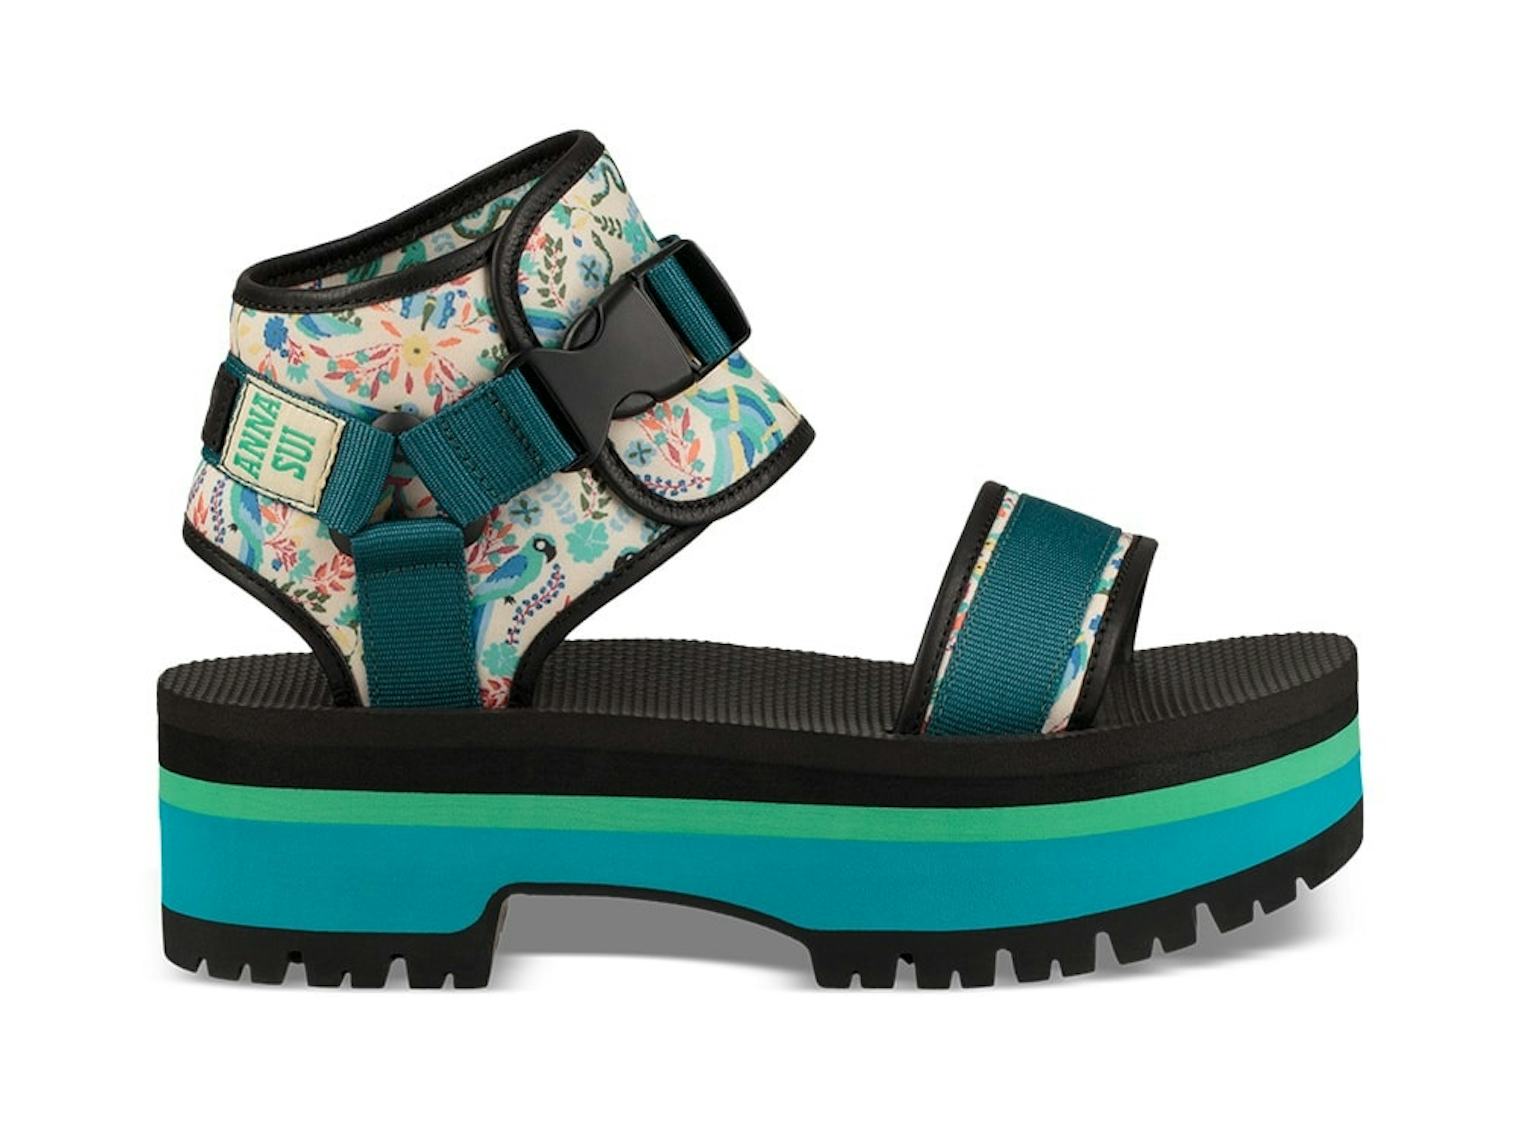 Anna Sui x Teva Have The Perfect Ugly-Cute Sandal For Summer